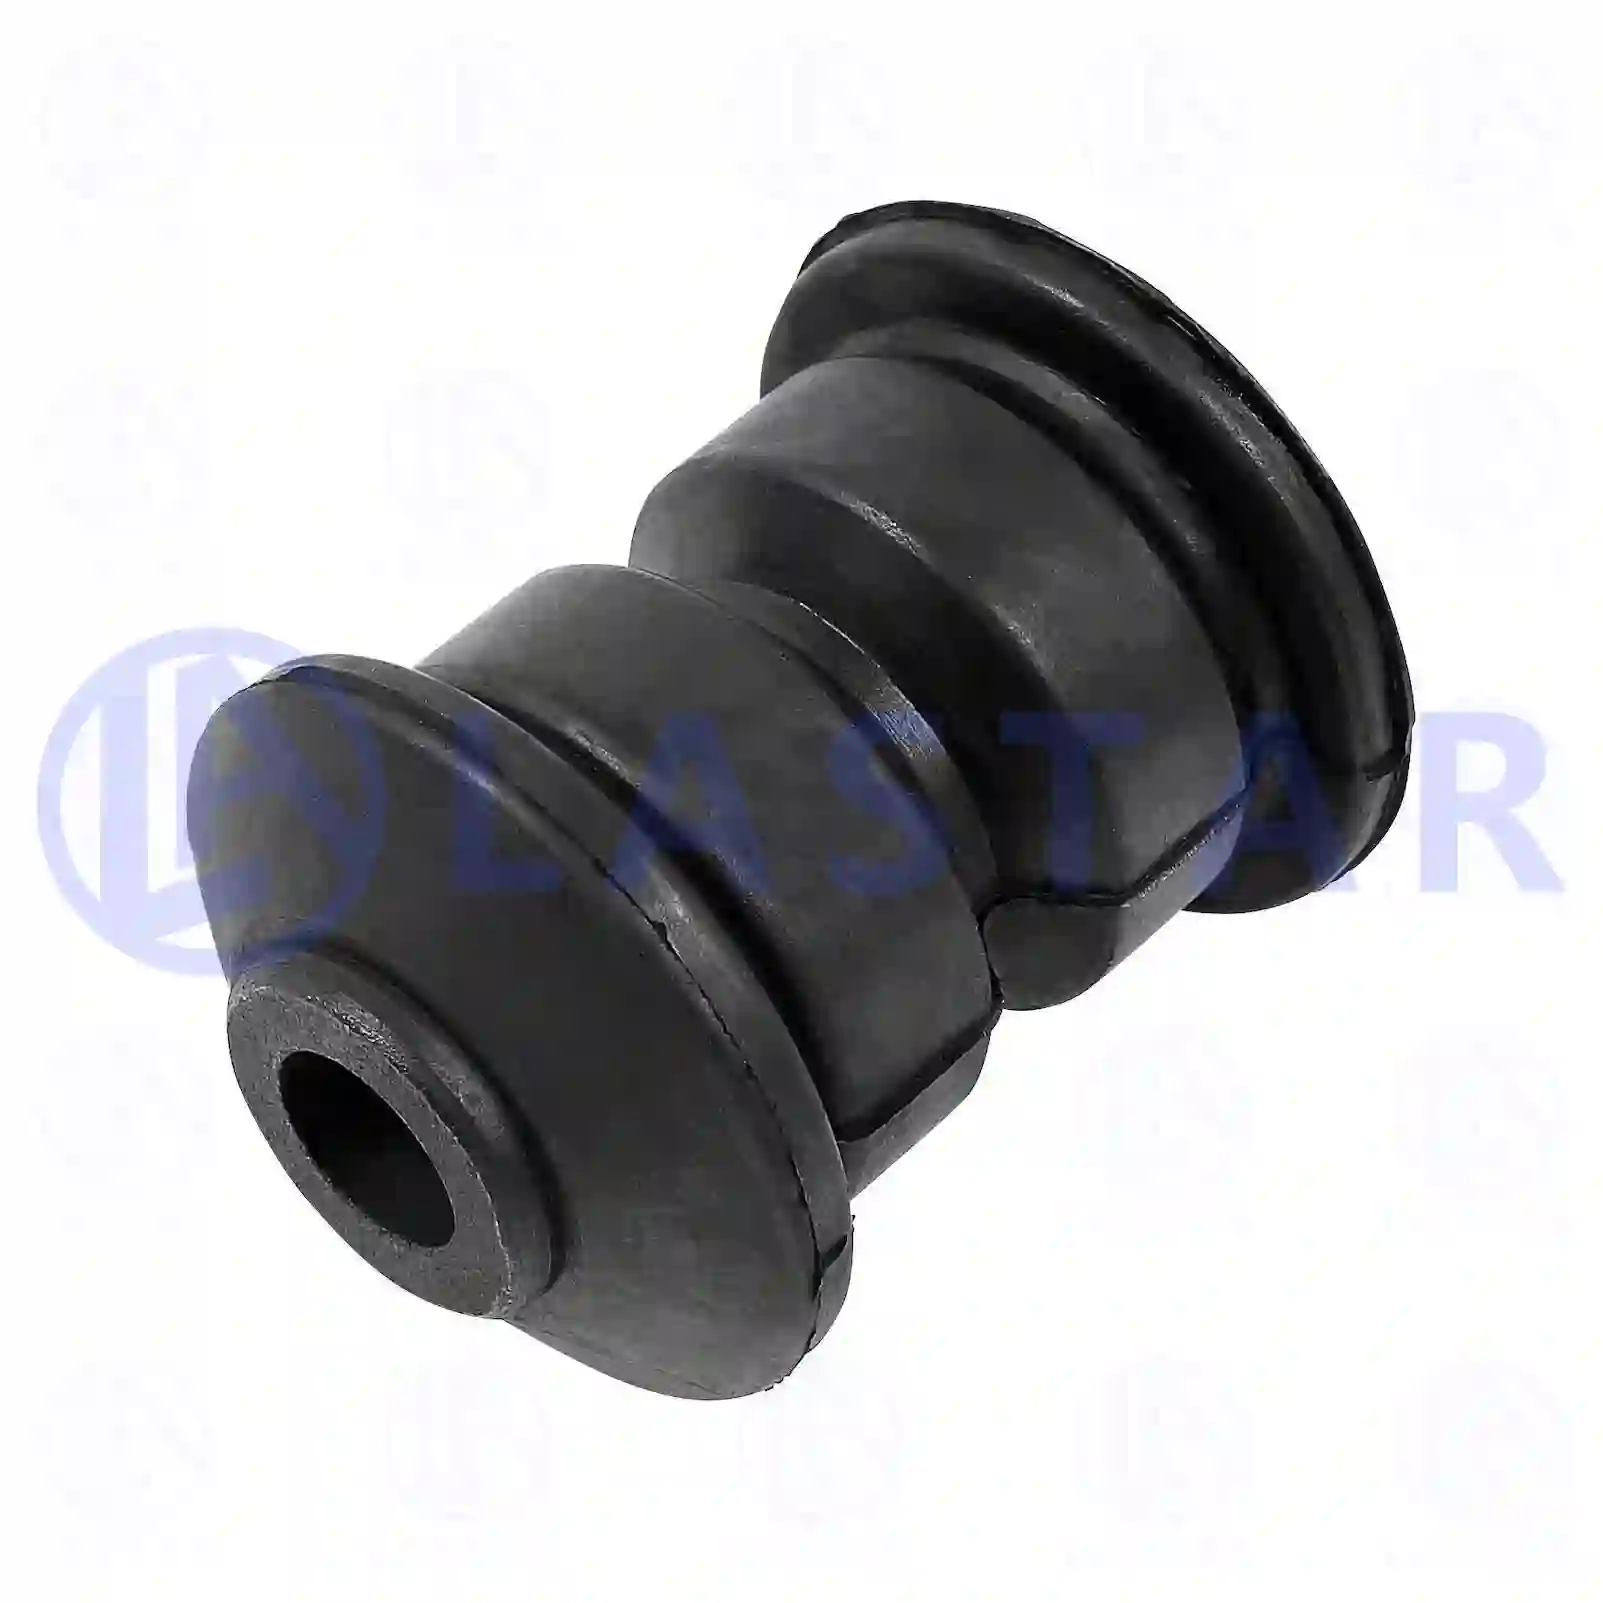 Rubber mounting, 77730893, 6383330014, 6393330214, 6393330314 ||  77730893 Lastar Spare Part | Truck Spare Parts, Auotomotive Spare Parts Rubber mounting, 77730893, 6383330014, 6393330214, 6393330314 ||  77730893 Lastar Spare Part | Truck Spare Parts, Auotomotive Spare Parts